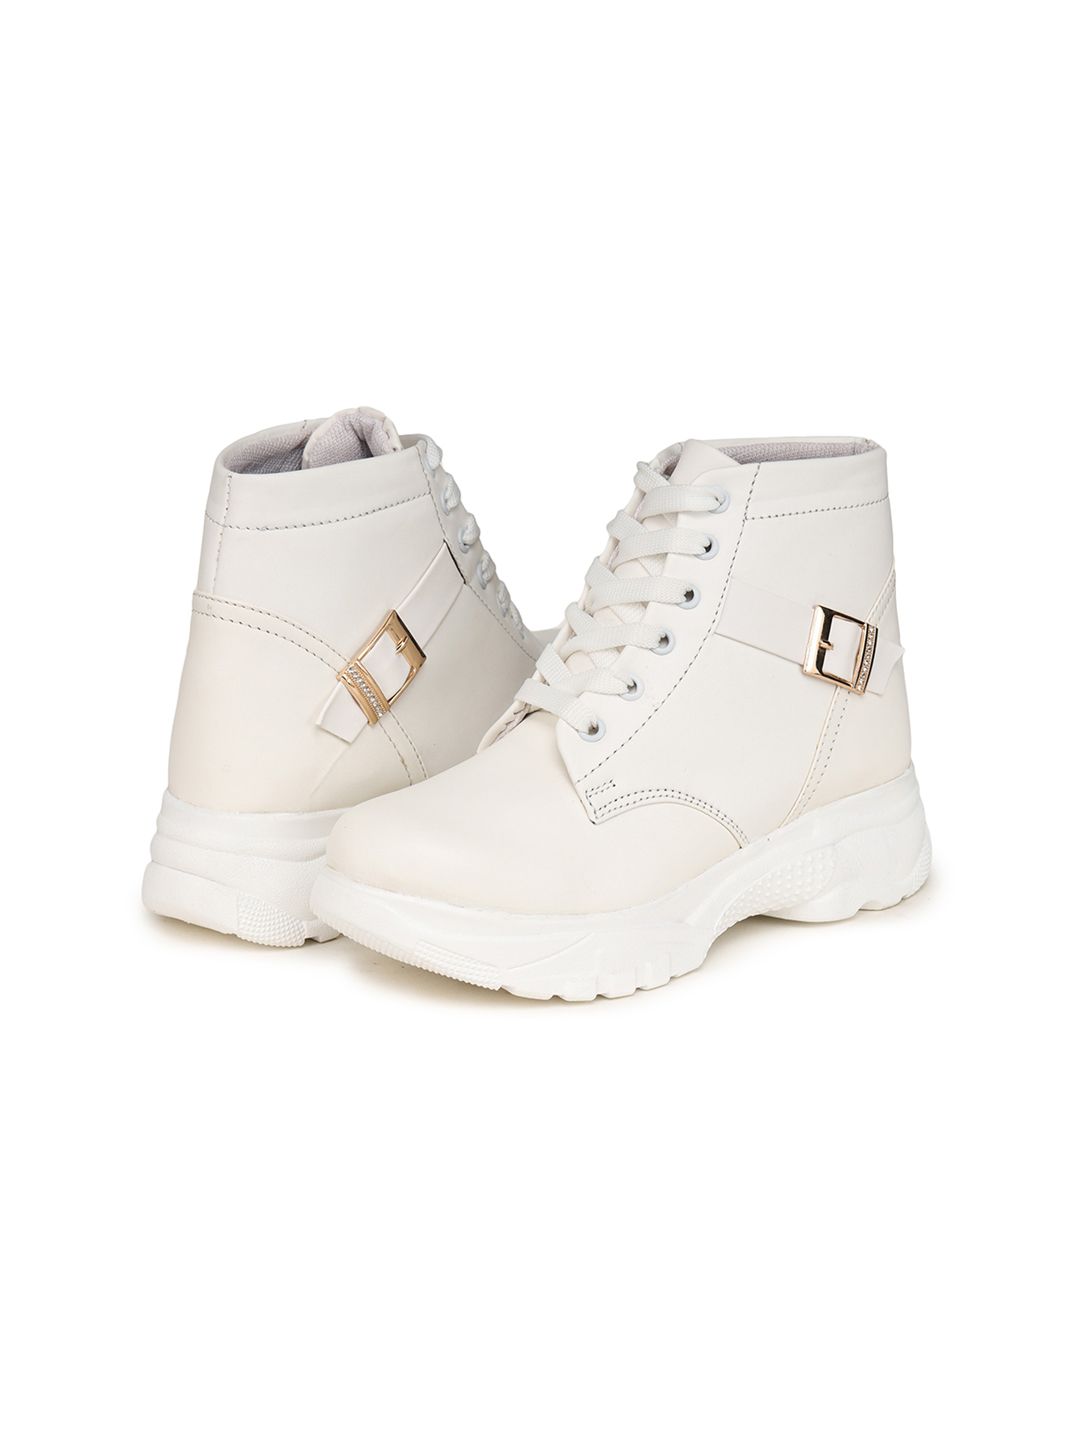 BOOTCO Women White Patterned High-Top Boots Price in India